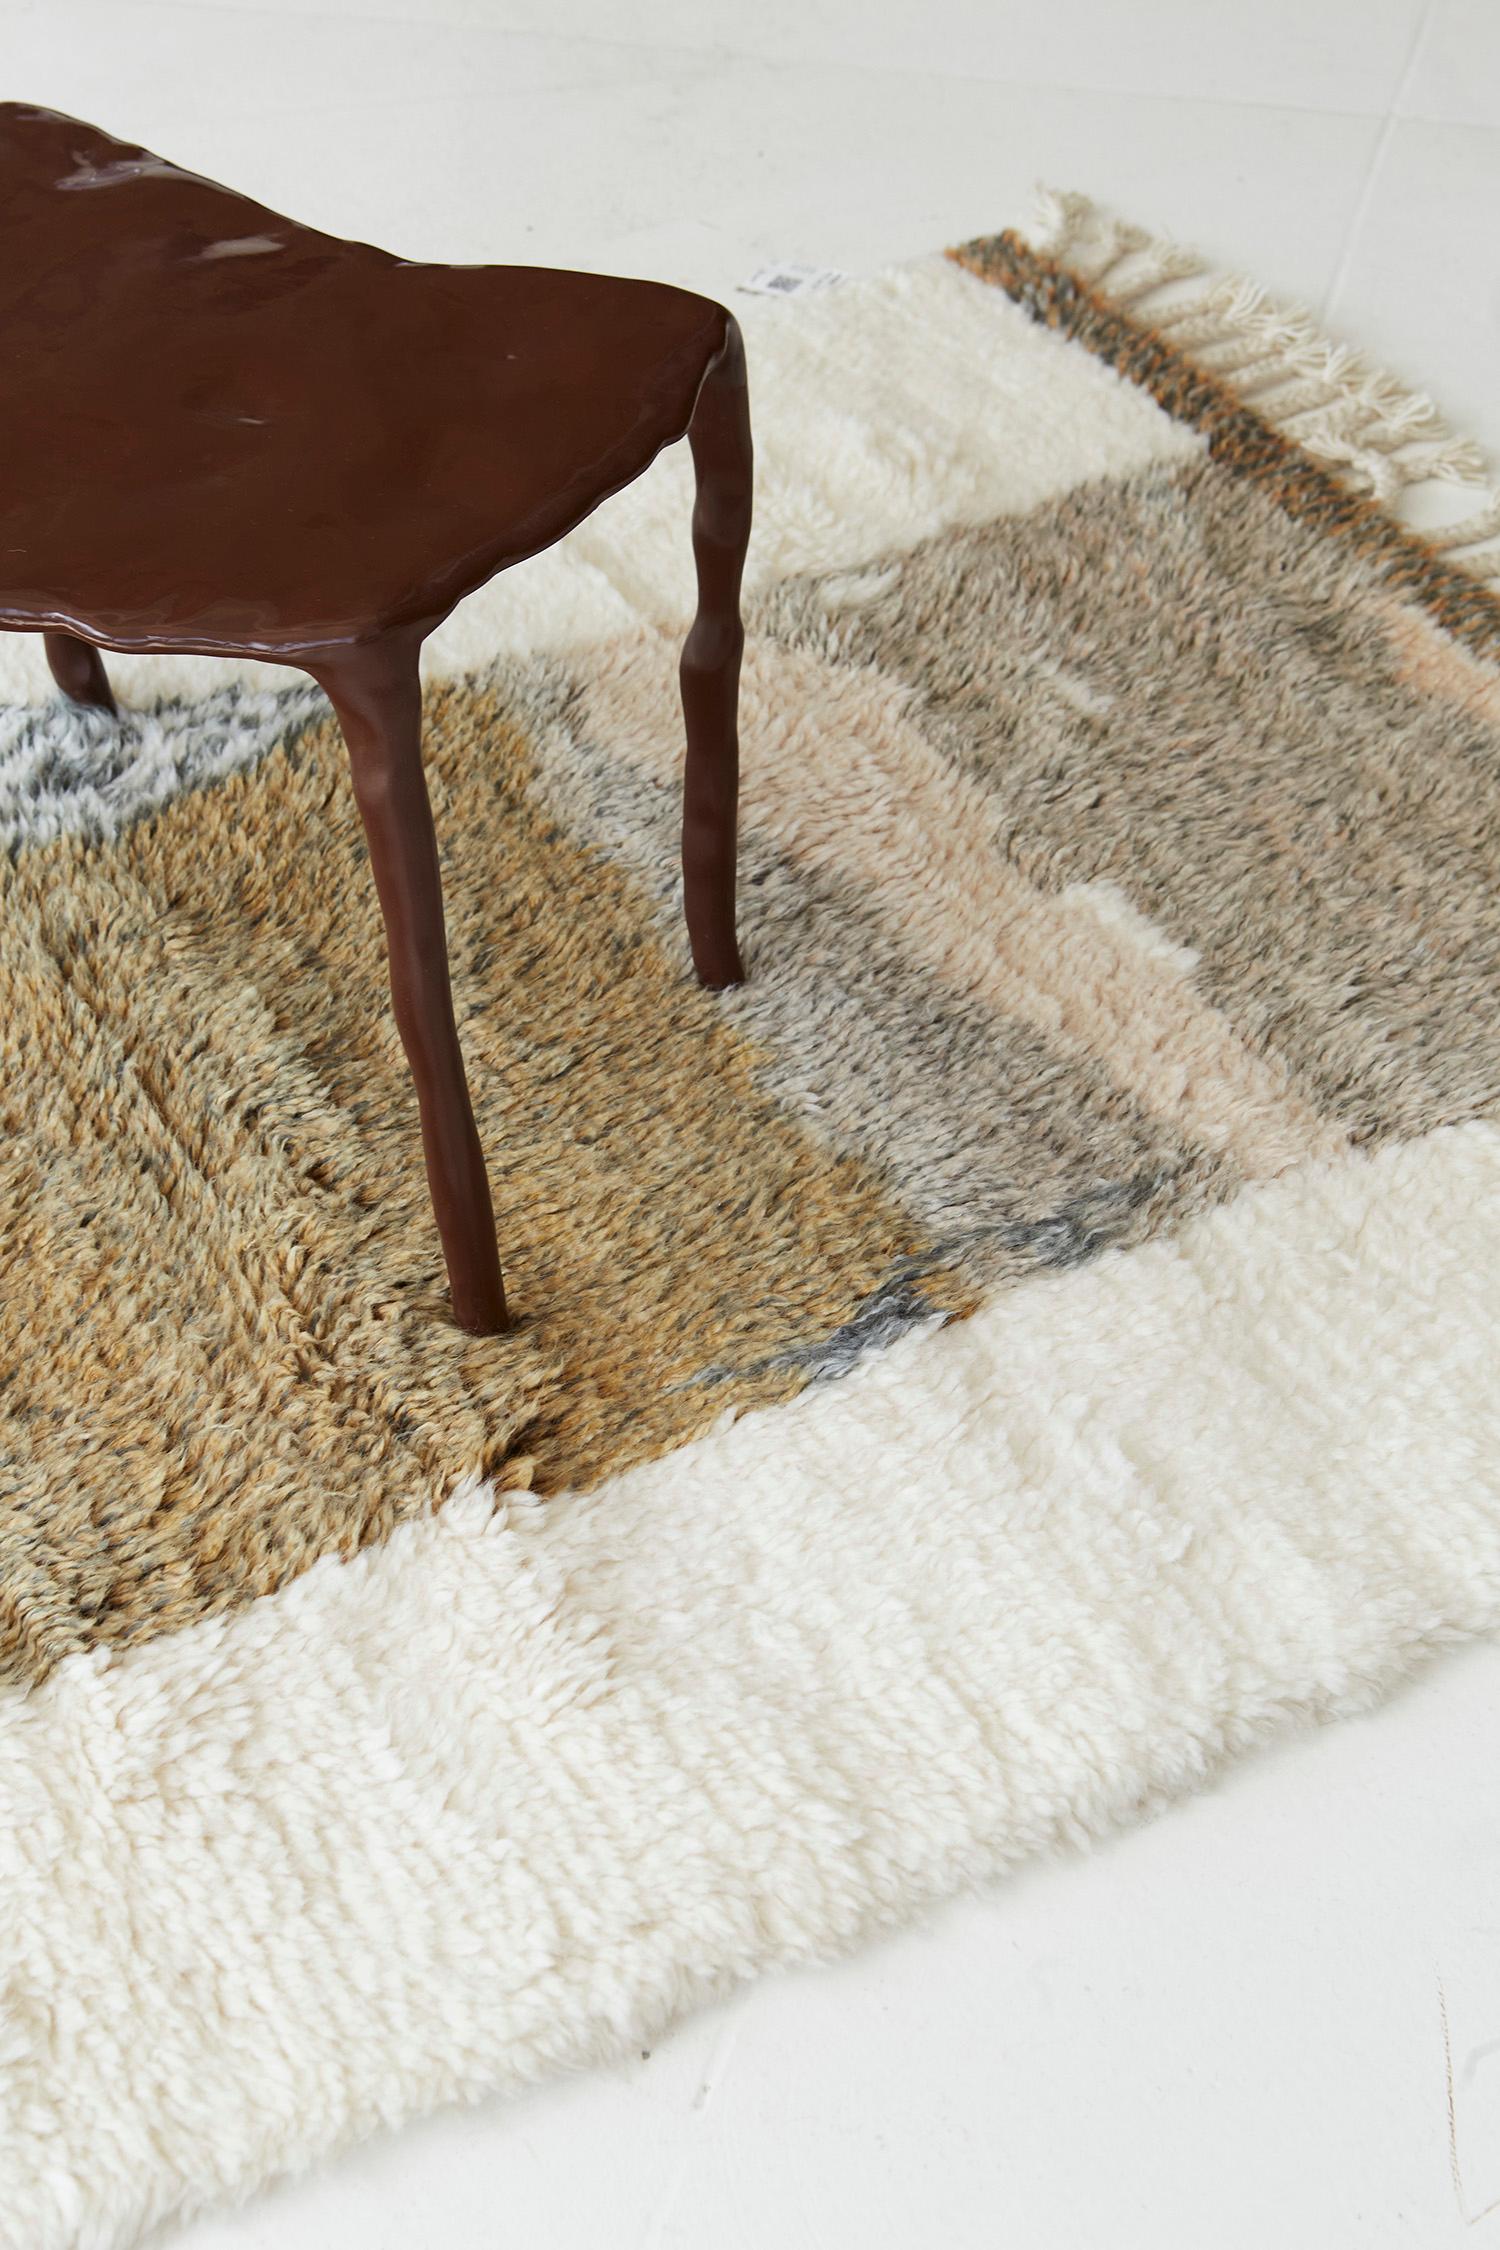 Jorja is a breathtaking rug inspired by the Atlas Mountains of Morocco. This magnificent rug features earth-toned colors and irregular shapes and design elements that work cohesively to make for a great contemporary interpretation for the modern